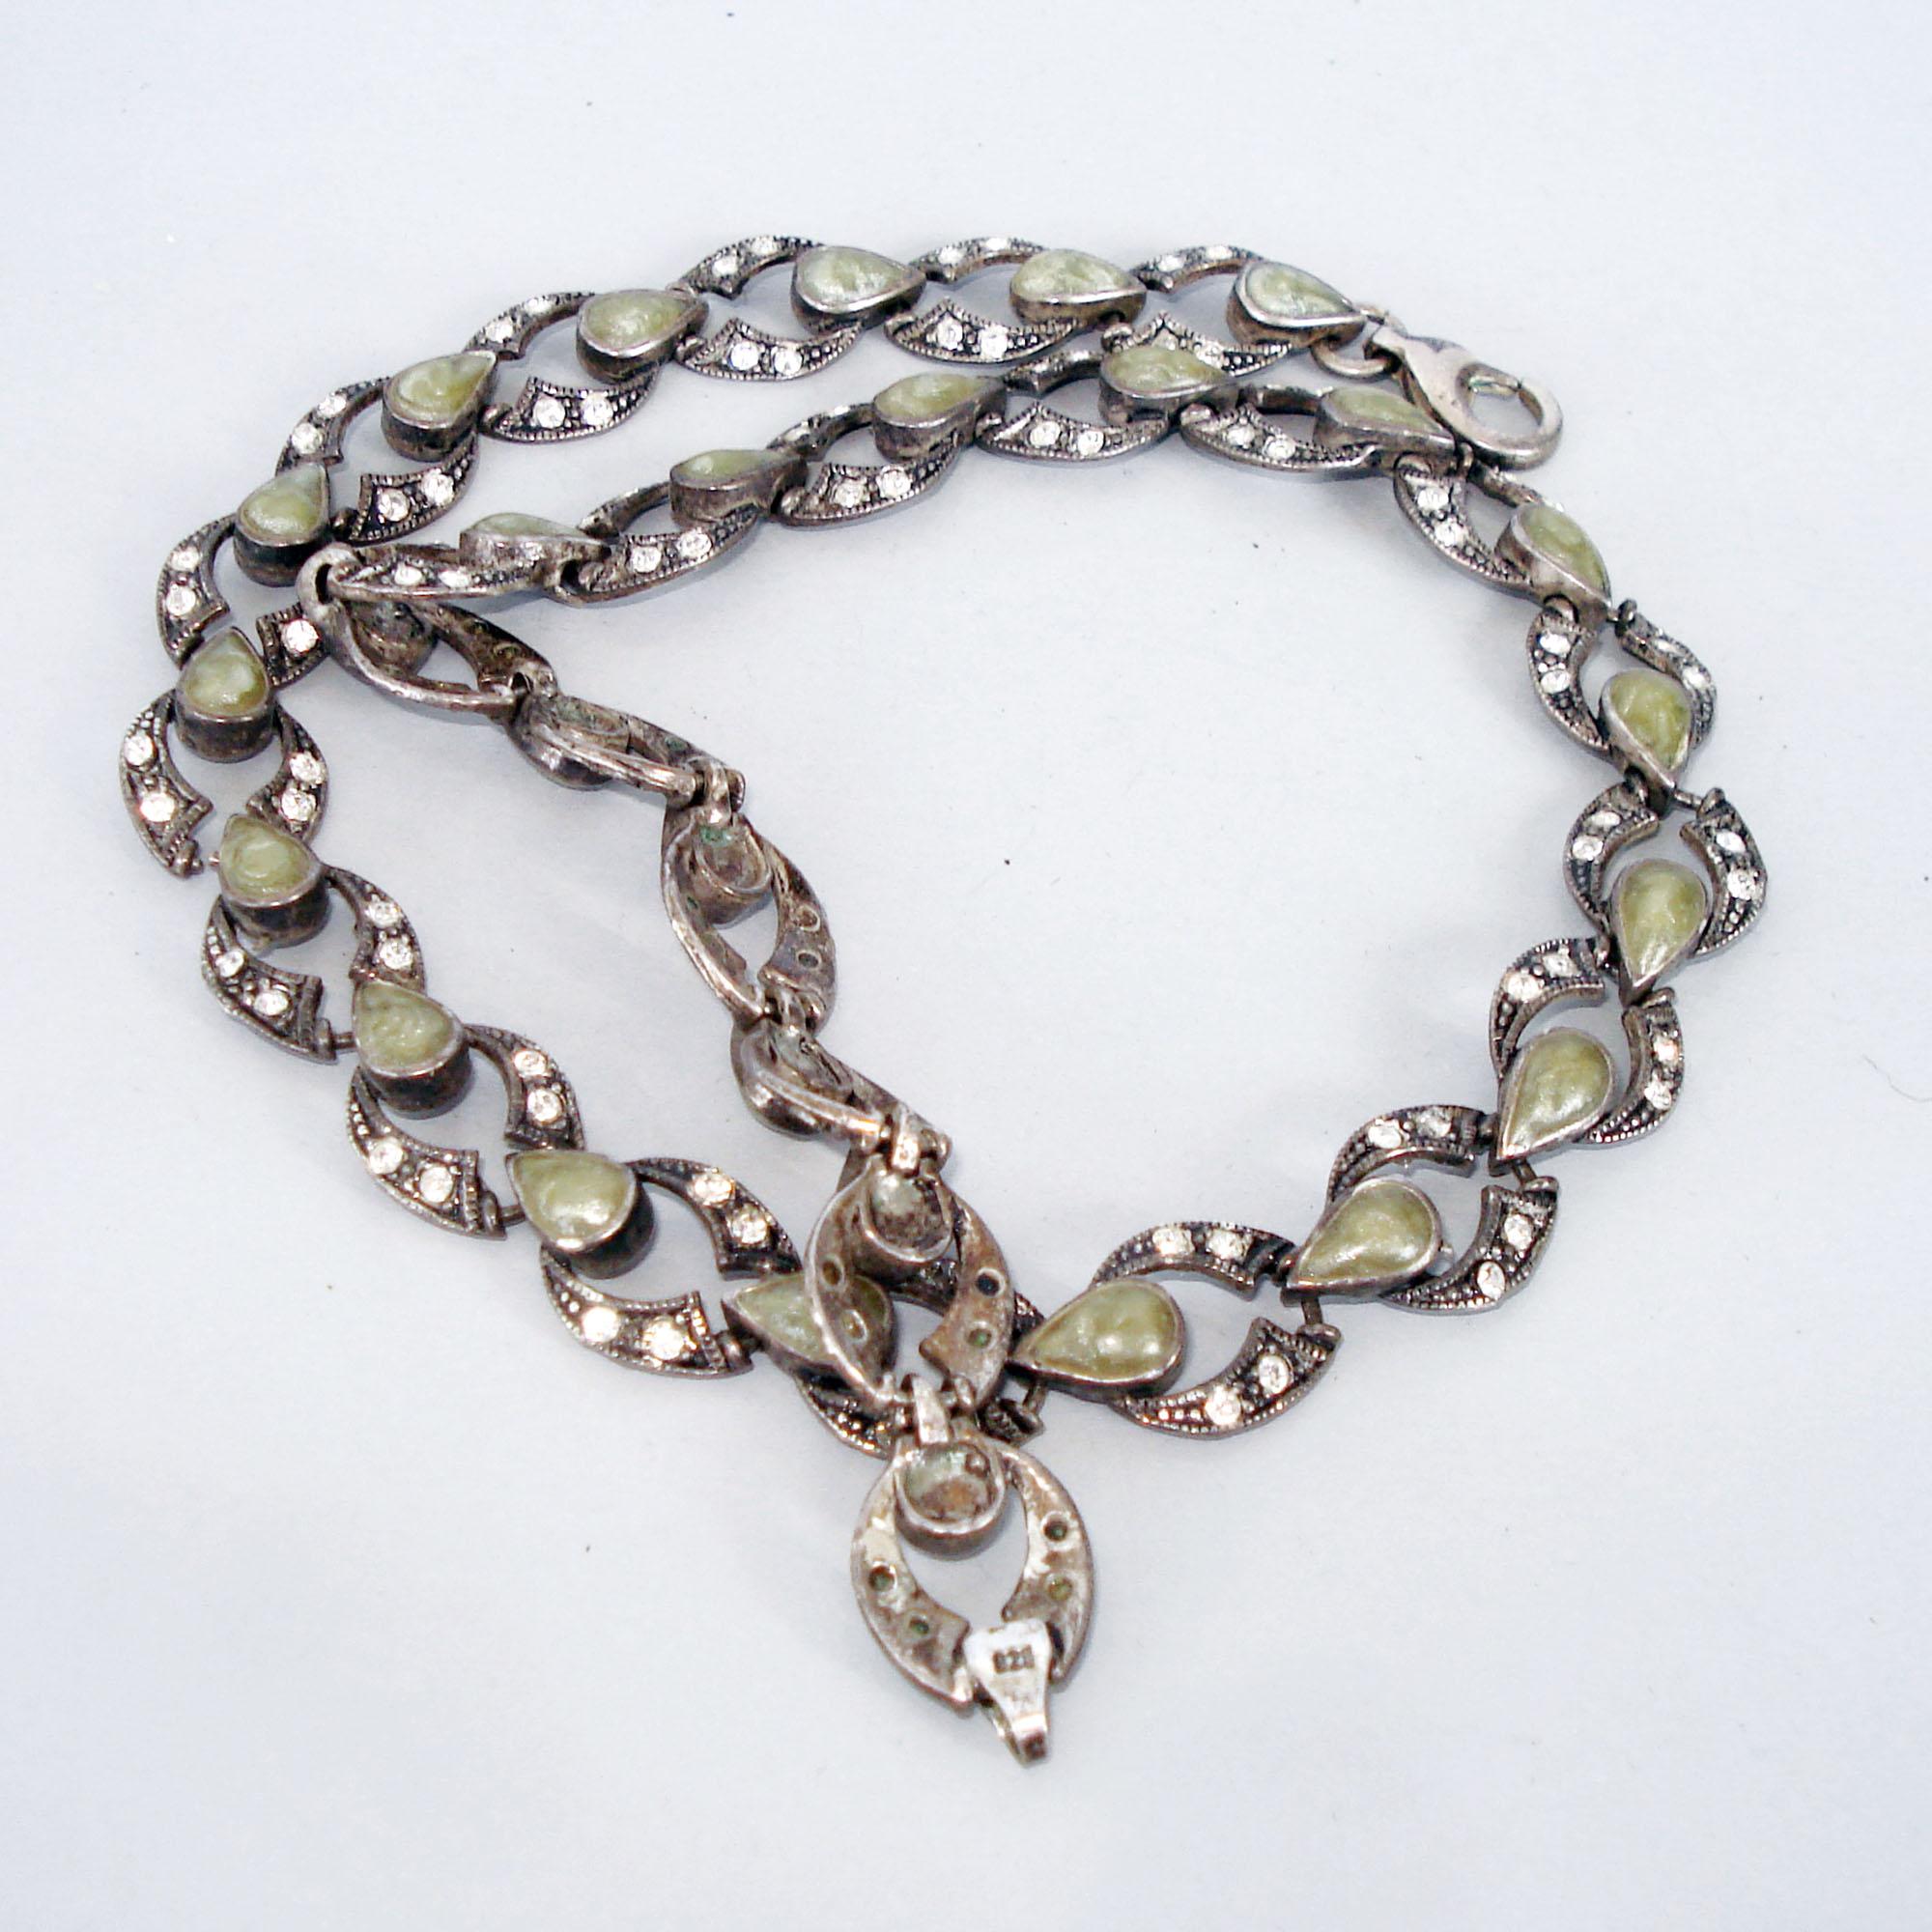 Vintage Silver and Marcasite Jewelry Set Necklace, Bracelet and Earrings, 1980s 3